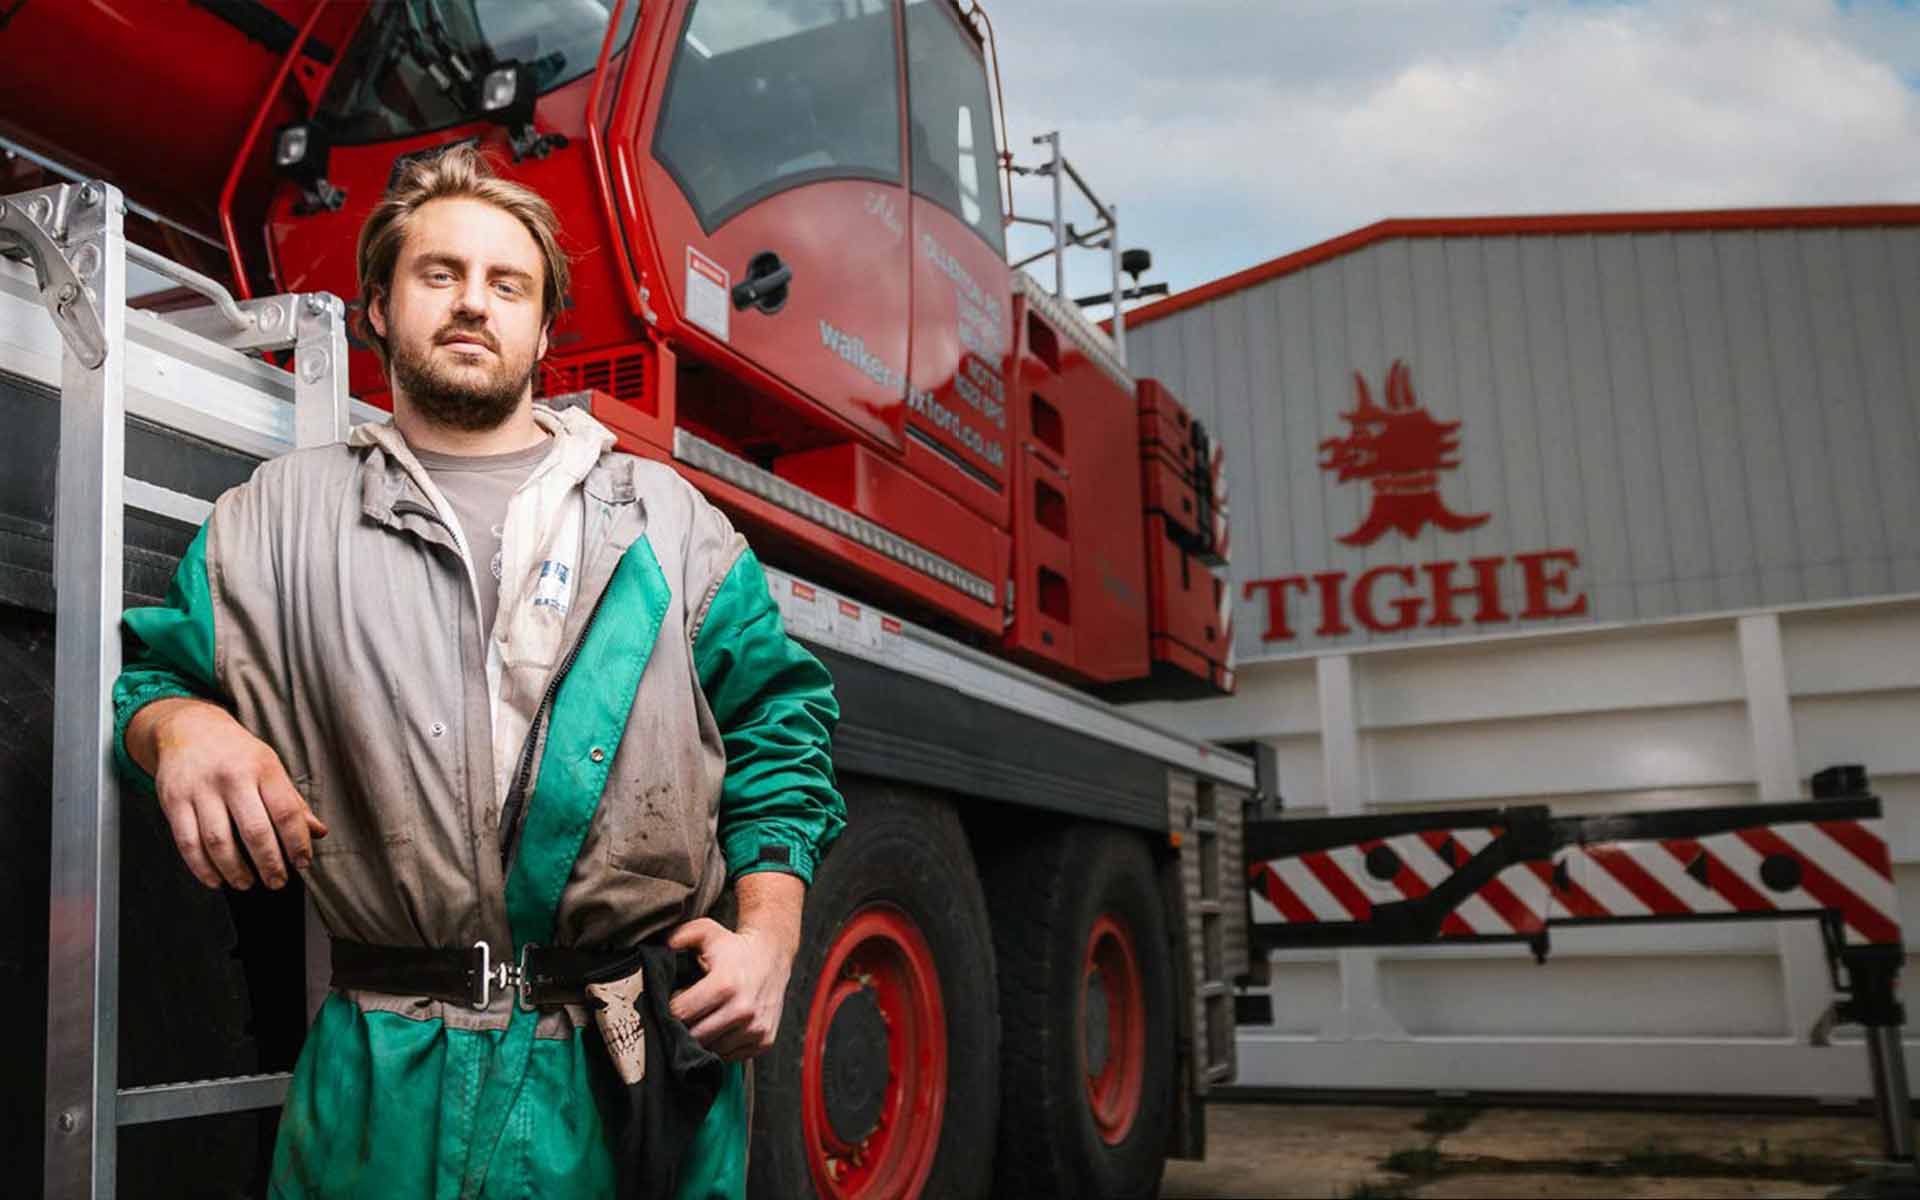 Apprentice Rici is wearing grey and emerald green overalls, leaning against a ladder with his elbow resting on it. The ladder is part of some large red machinery, the wheels of which are almost at Rici's shoulder height. They are stood in front of a building with signage which reads the company name, Tighe.